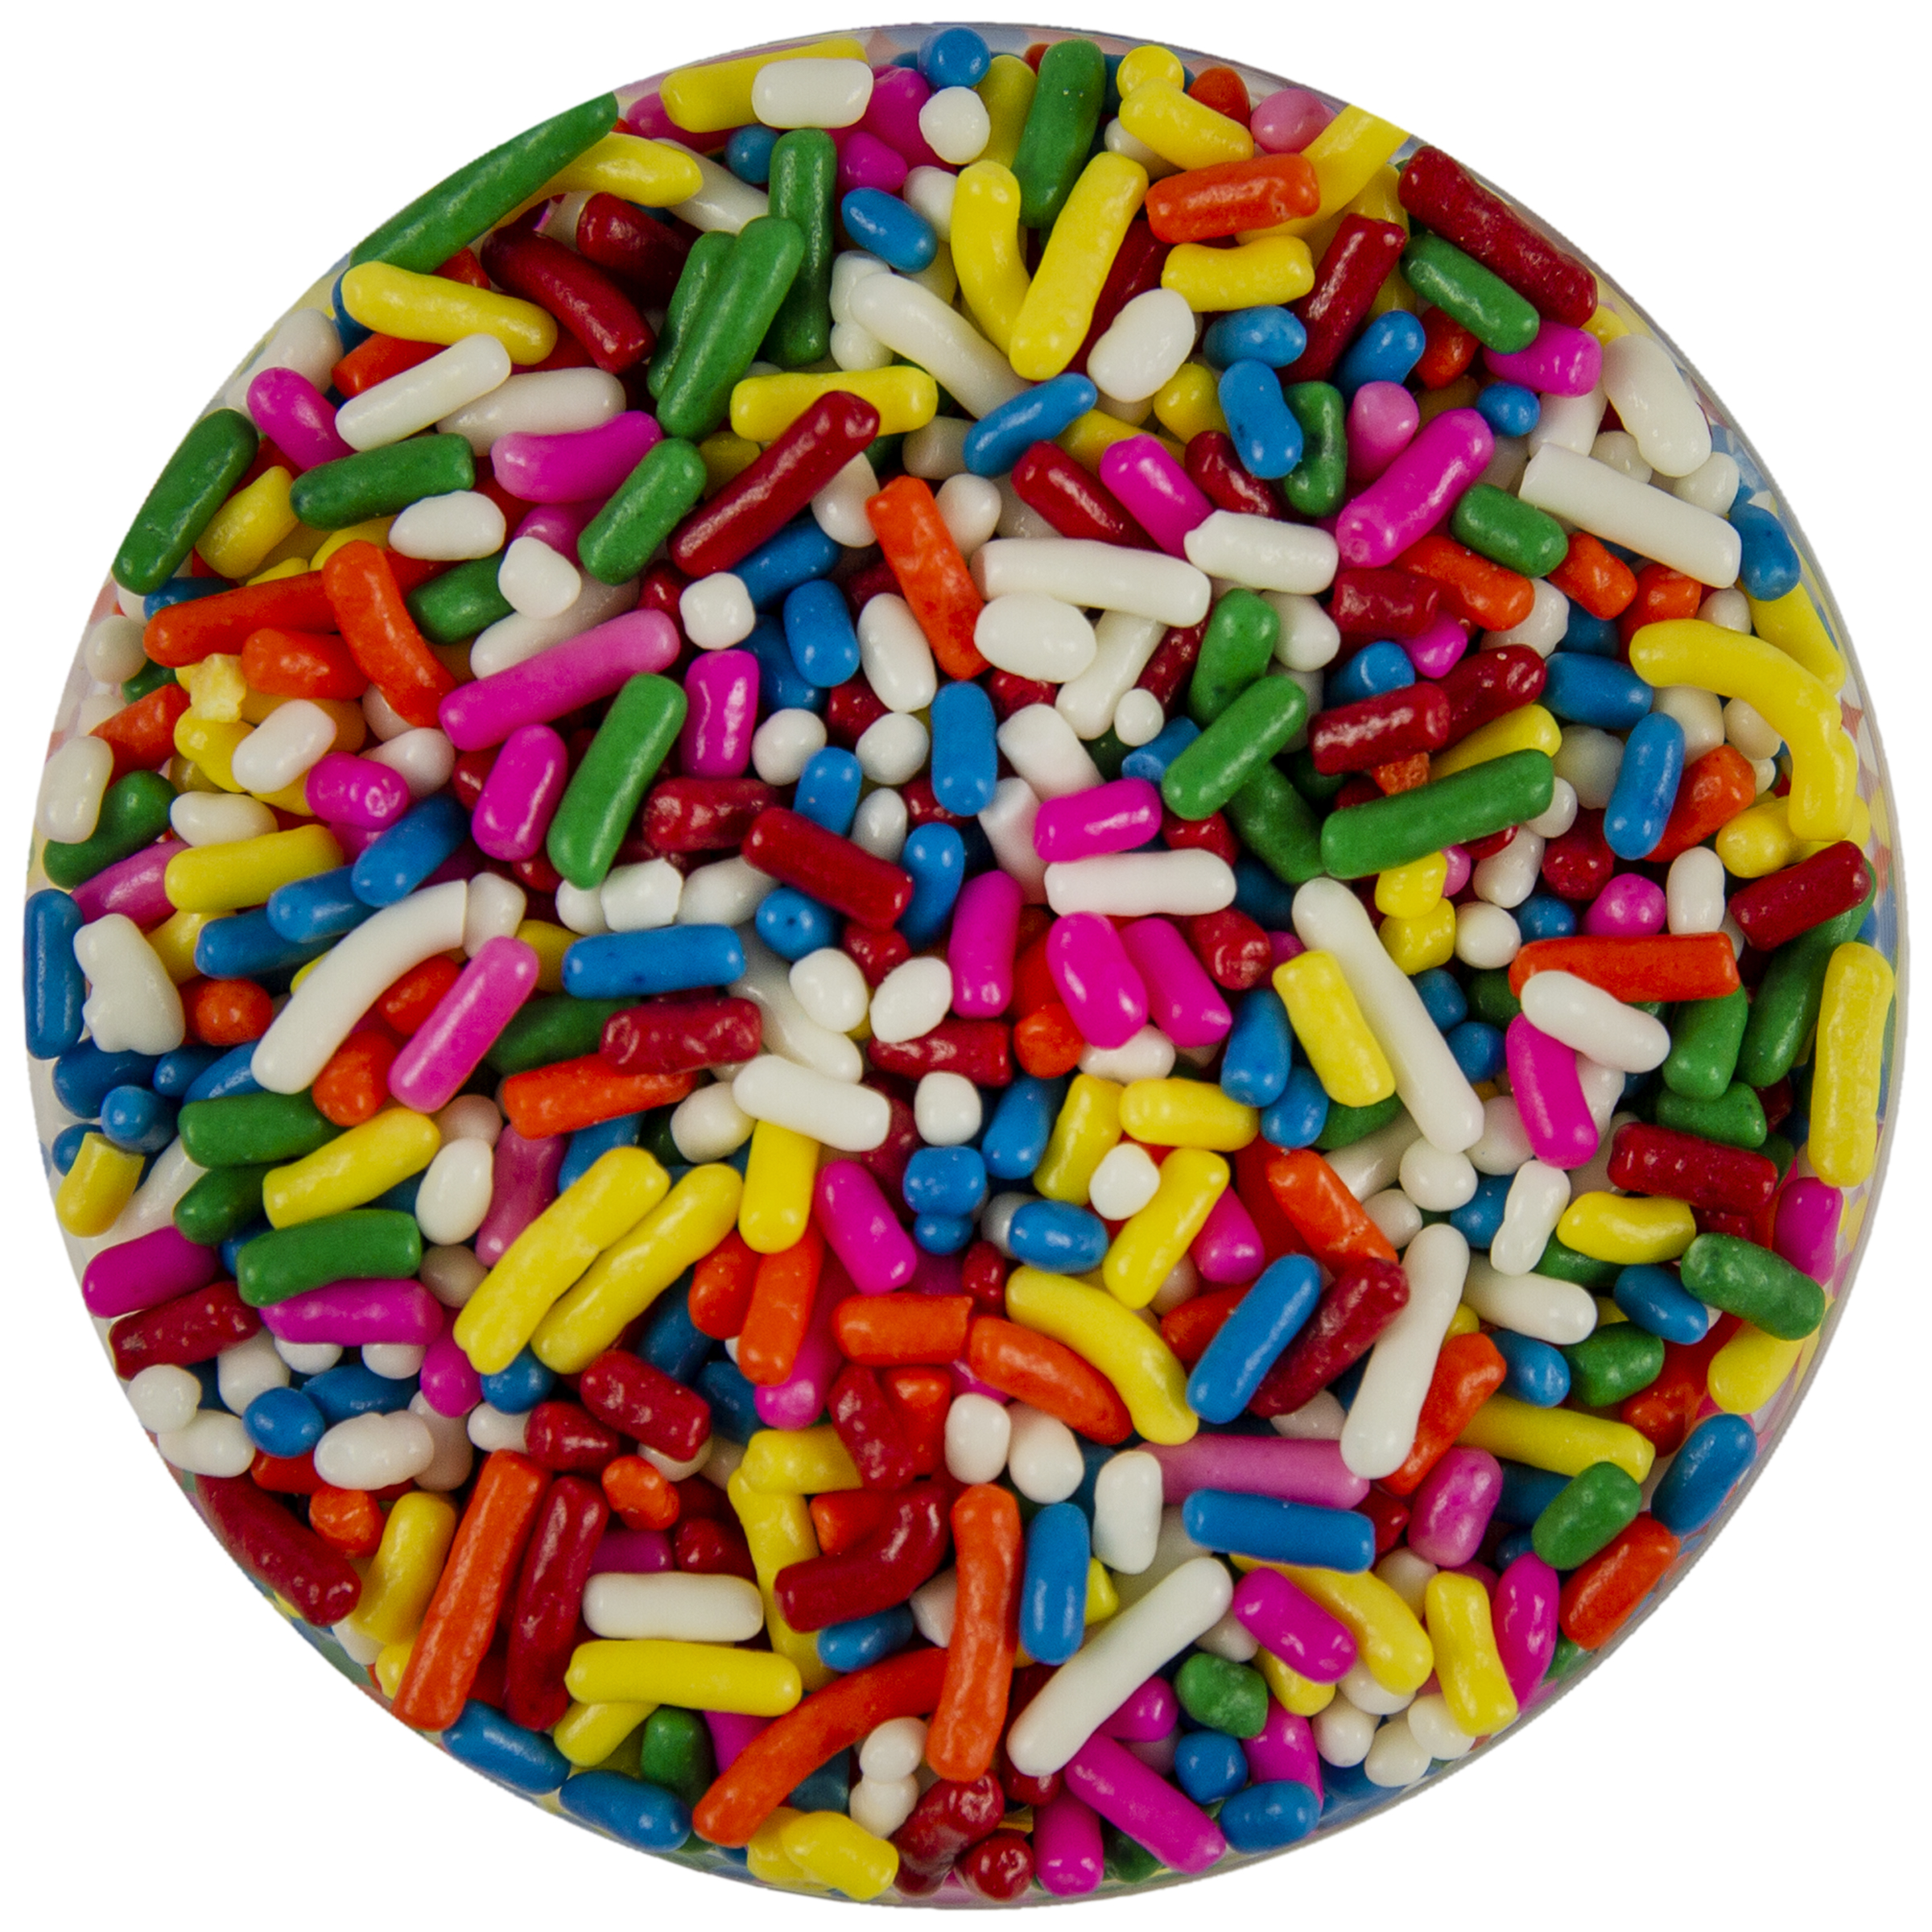 Betty Crocker Sweet Toppings, Rainbow Sprinkles - Carousel Mix, 10.5 Ounces - image 5 of 5